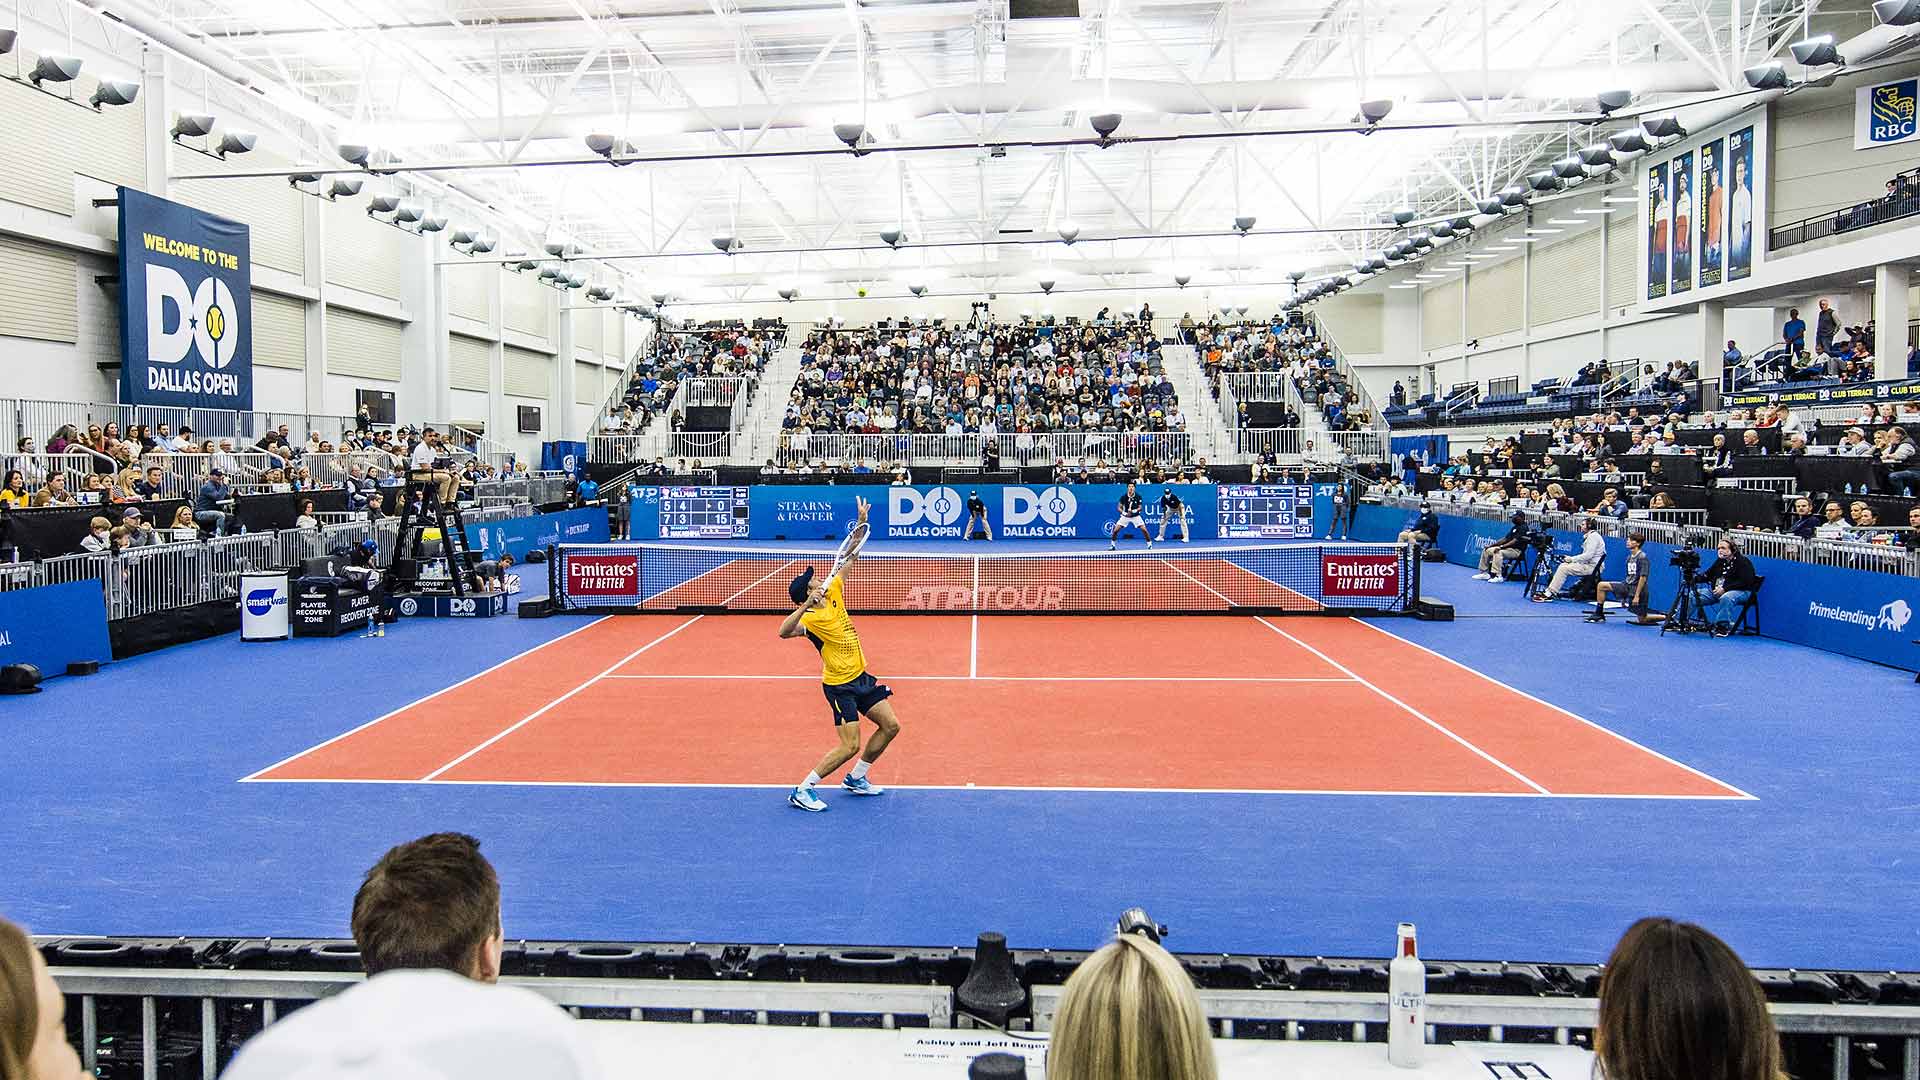 Why Everybody Is Pumped Up About The Inaugural Dallas Open ATP Tour Tennis